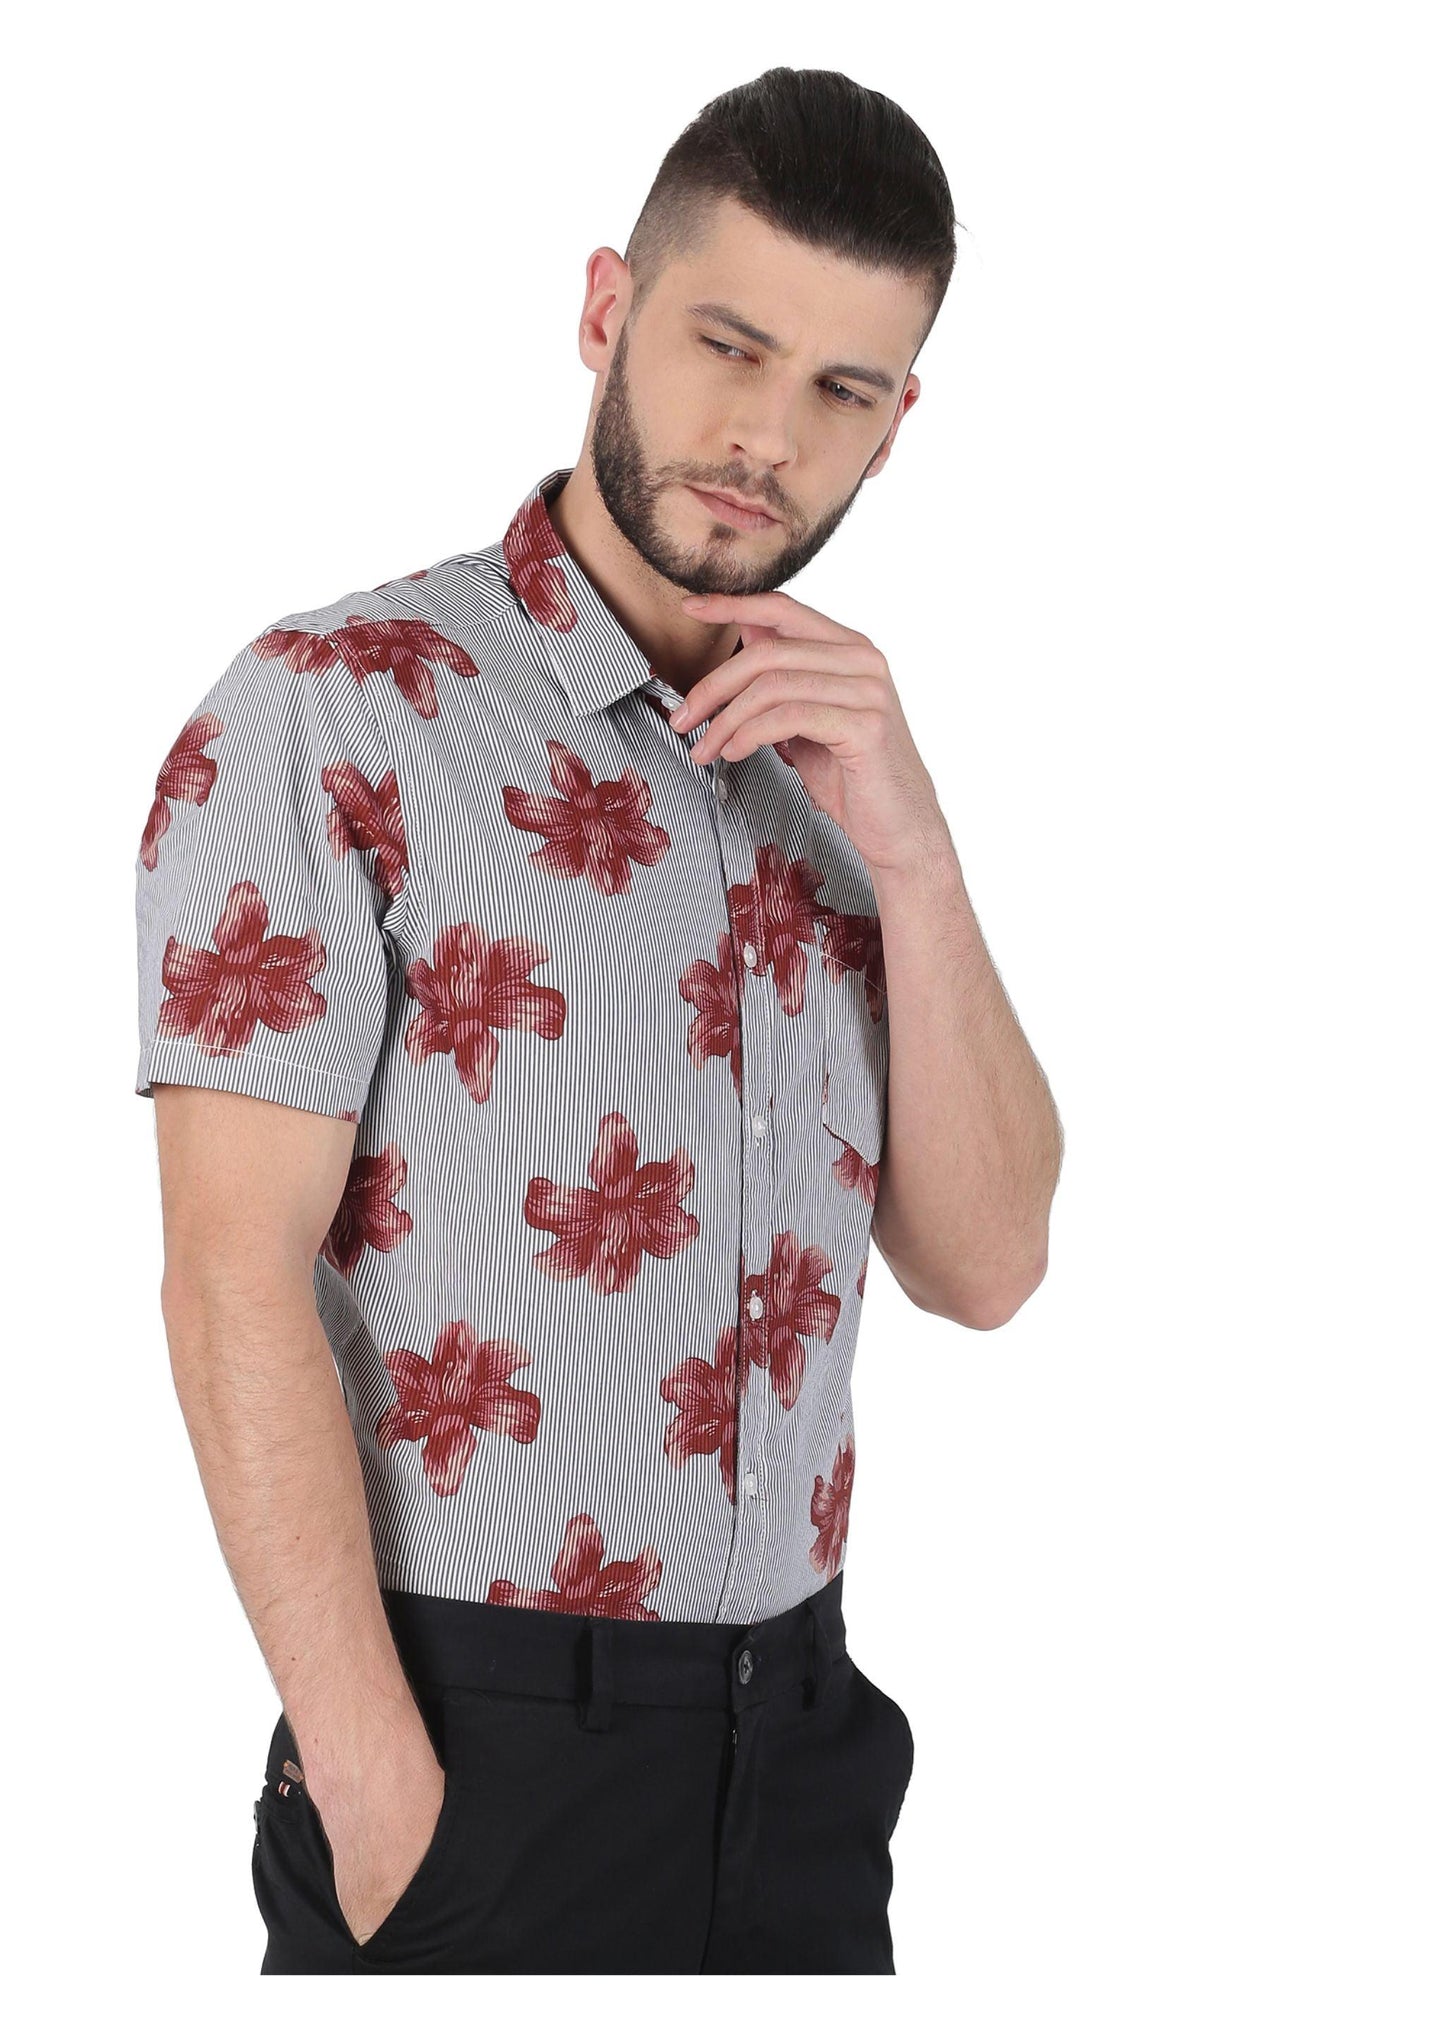 Tusok-brown-bloomFeatured Shirt, Vacation-Printed Shirtimage-Brown Bloom (2)